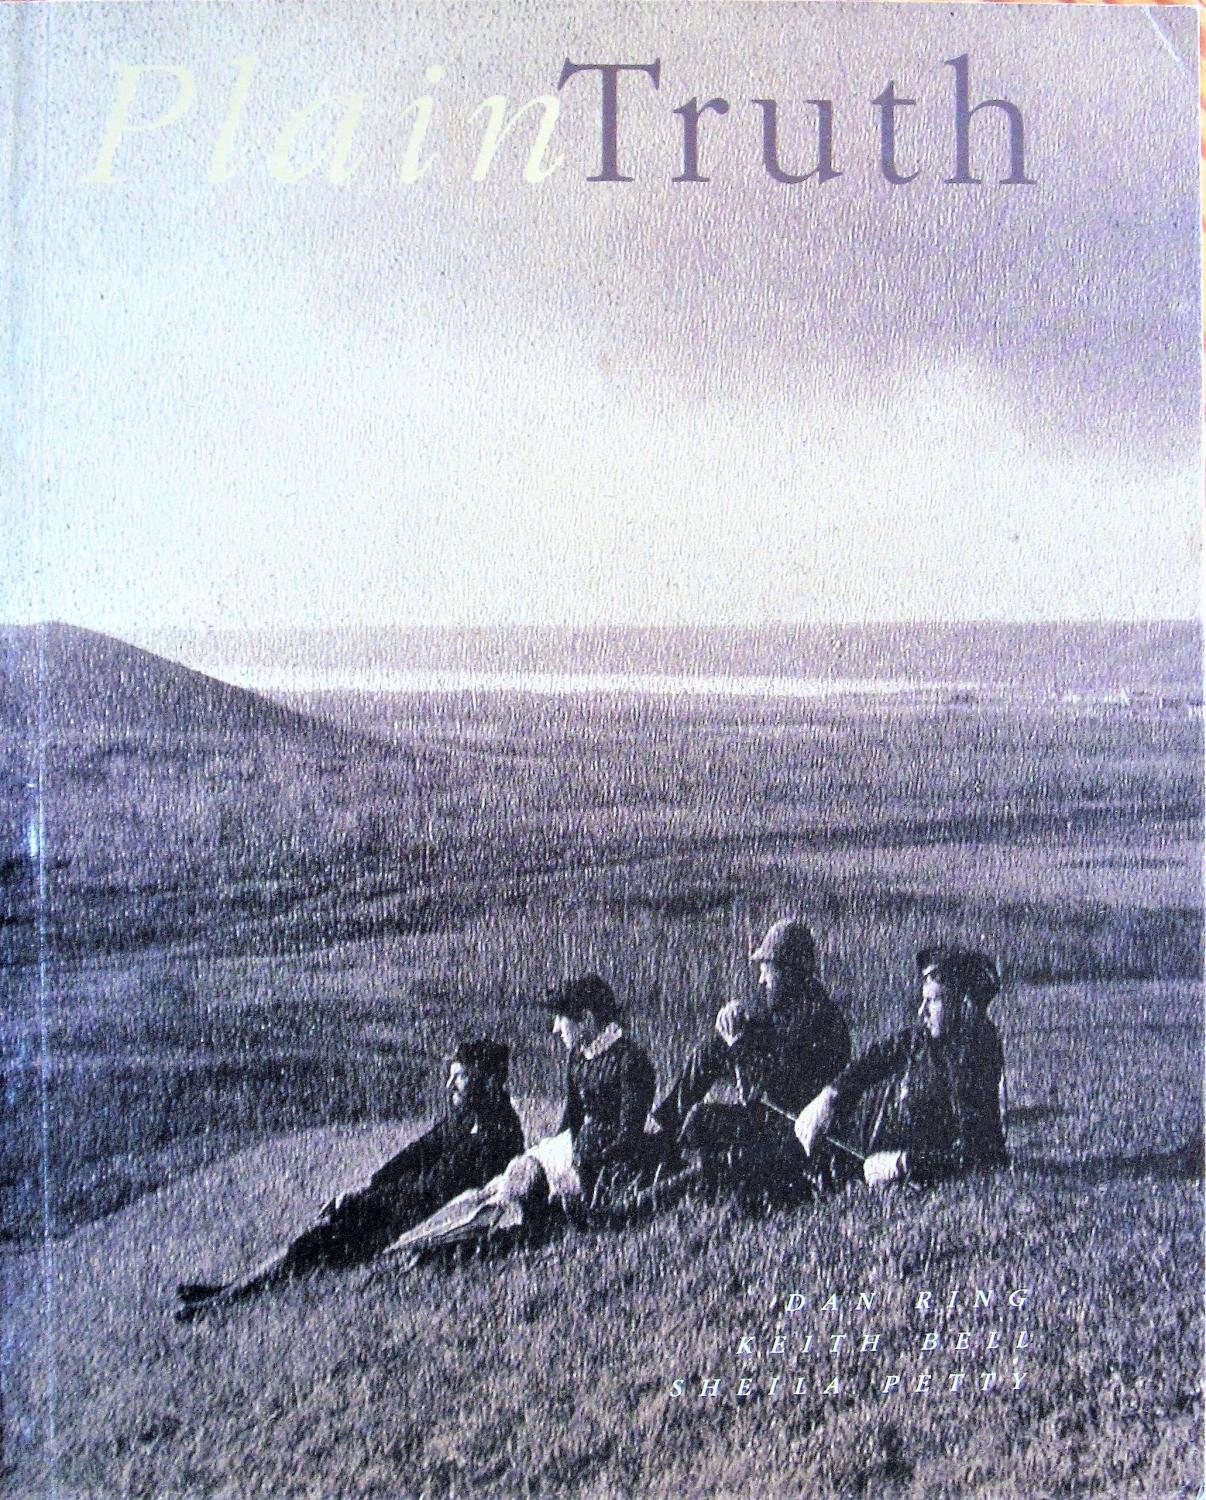 Plain Truth - Ring, Dan, Keith Bell, And Sheila Petty